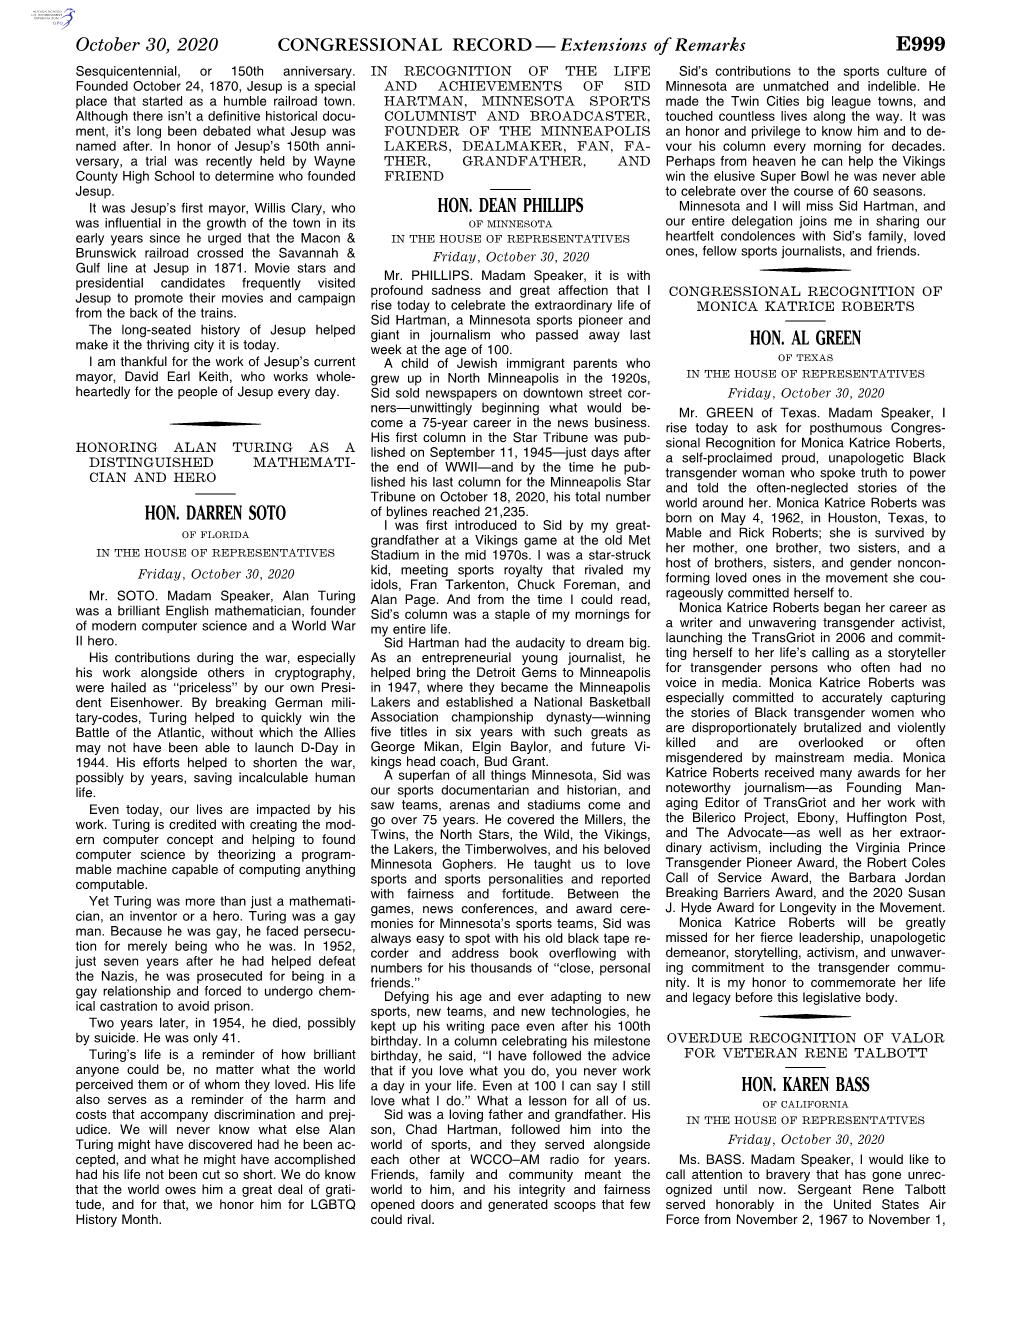 CONGRESSIONAL RECORD— Extensions of Remarks E999 HON